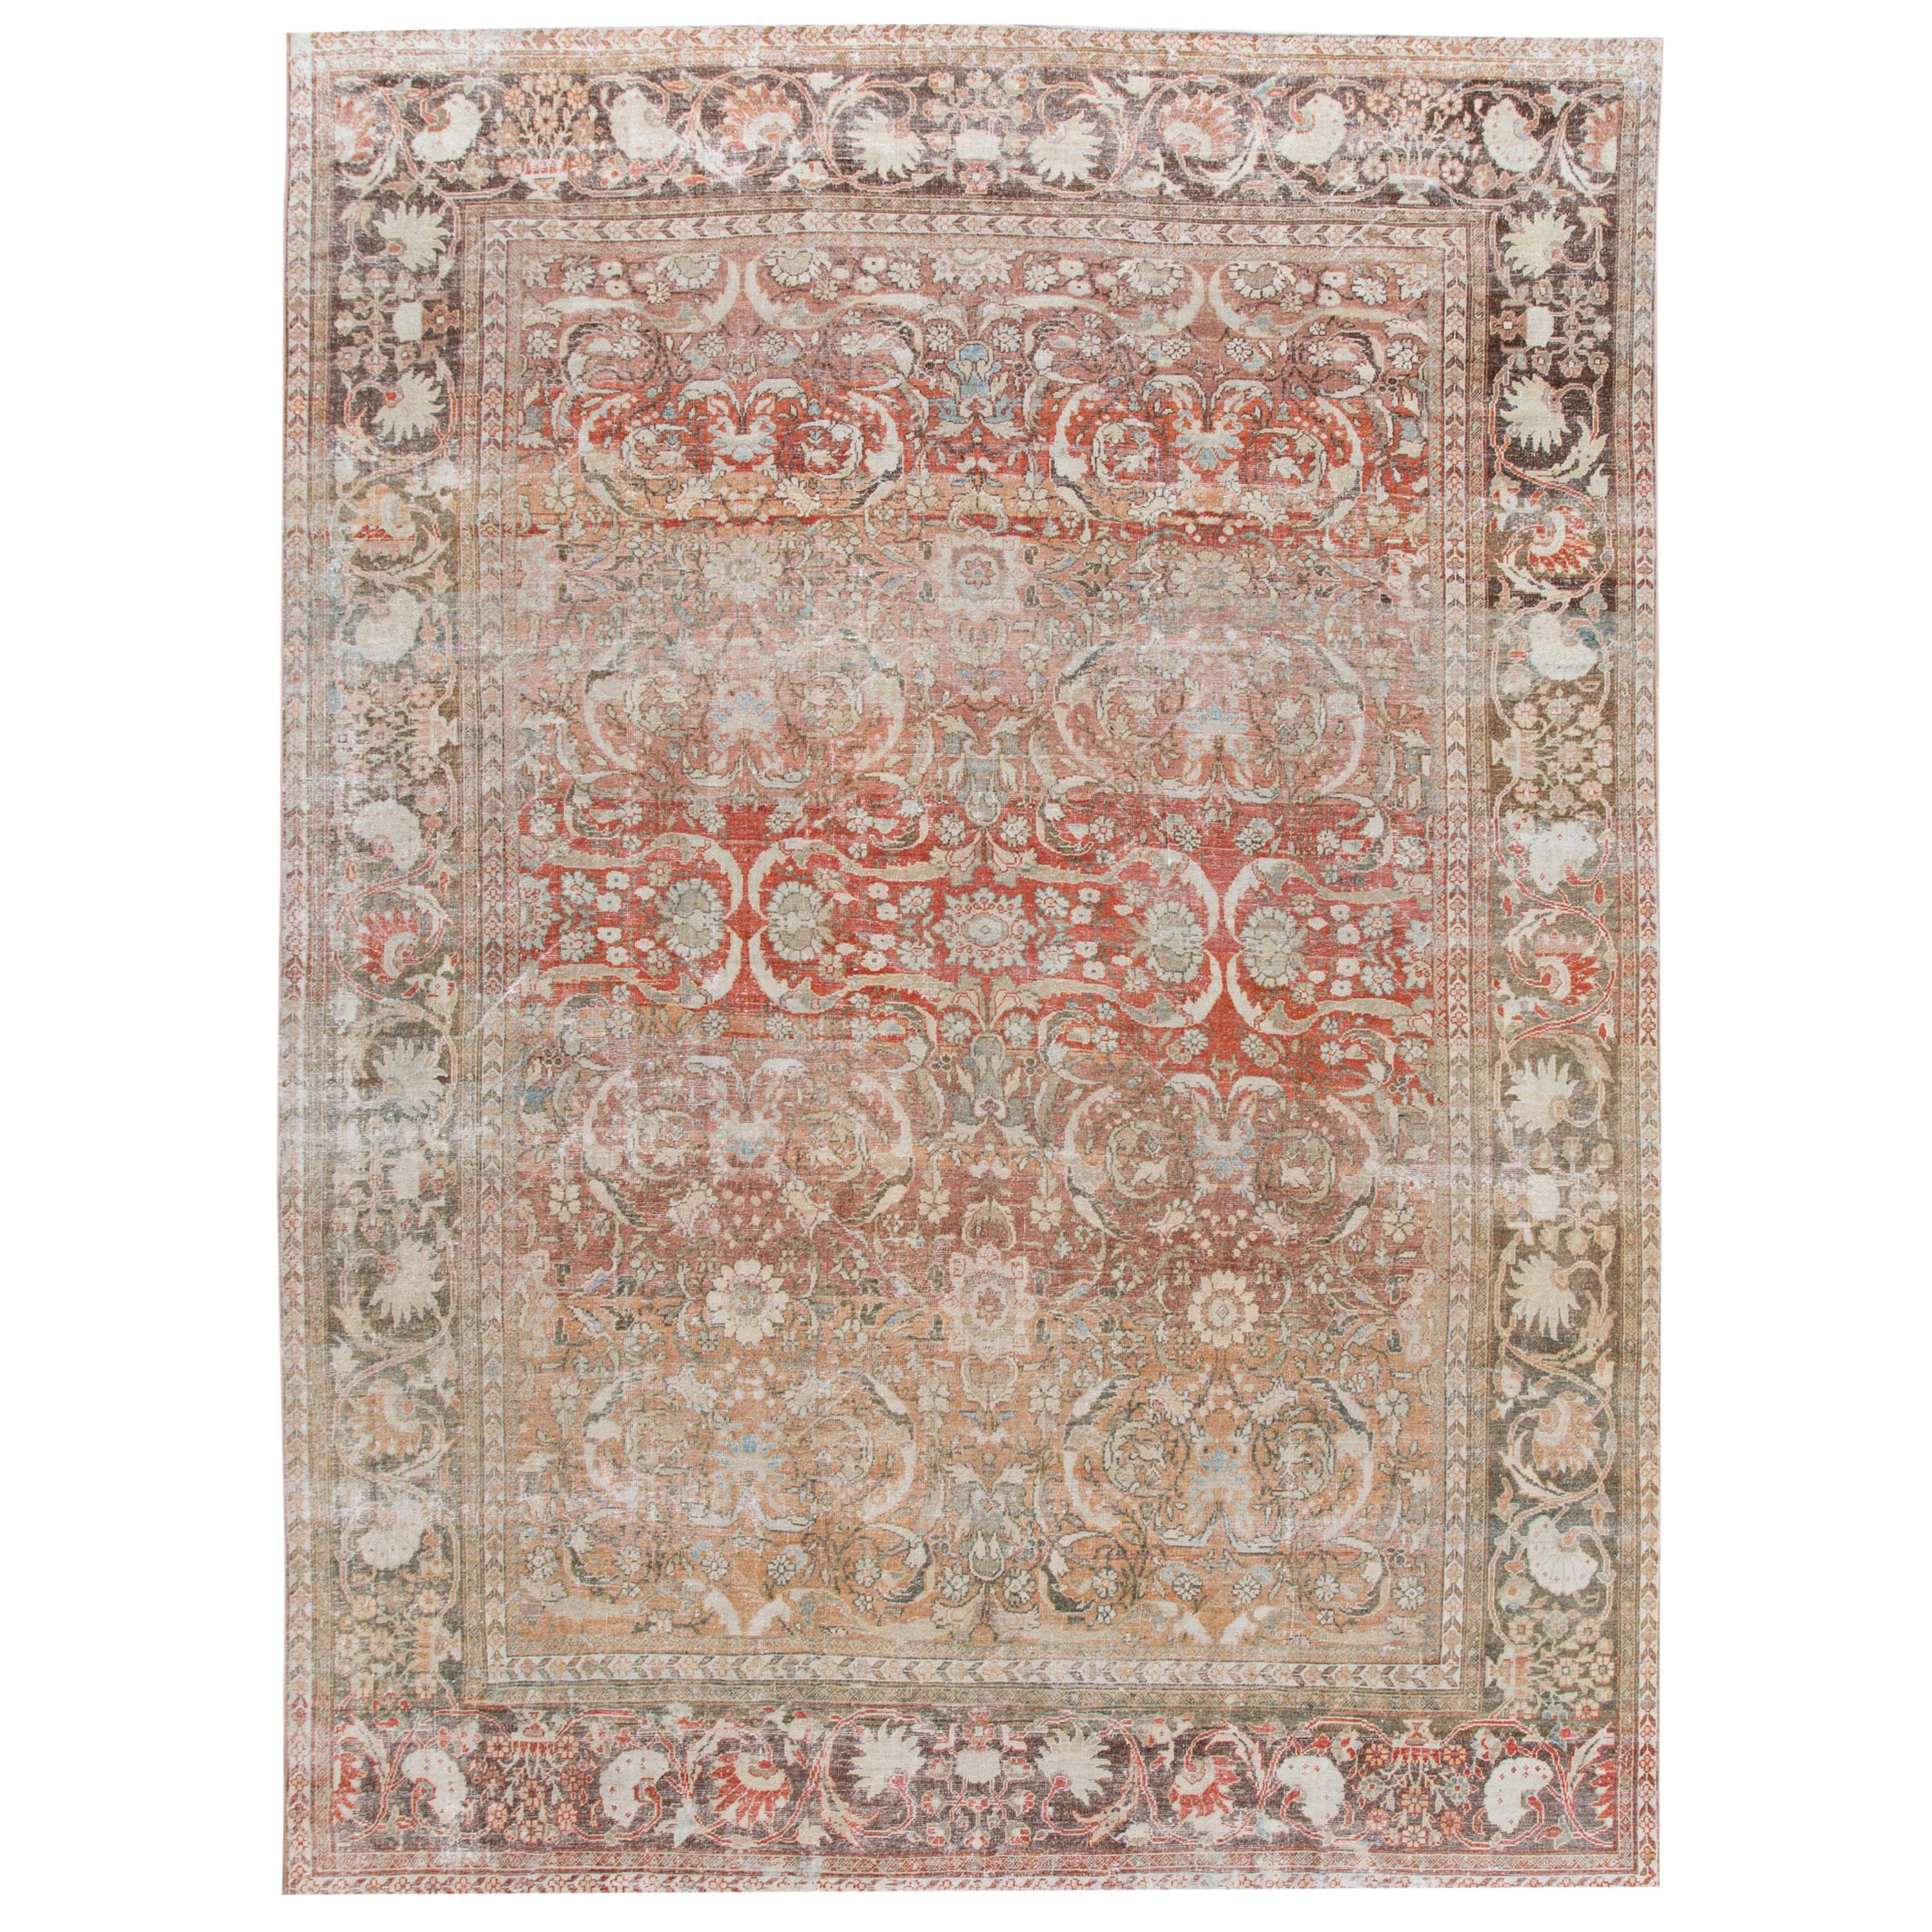 Antique Shabby Chic Red Mahal Wool Rug